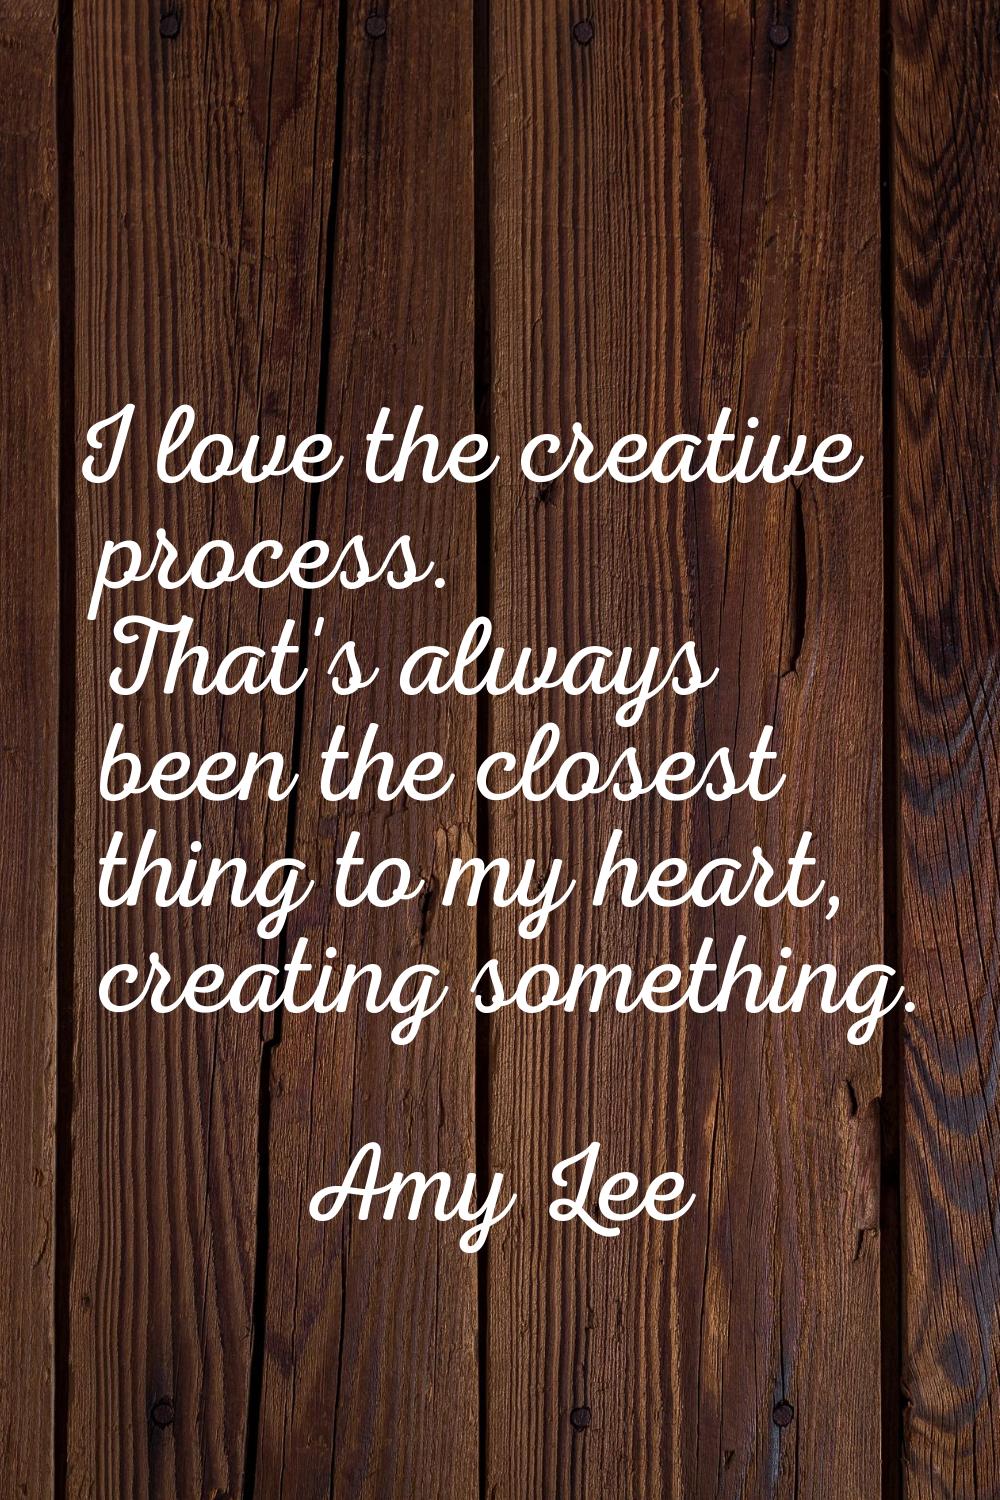 I love the creative process. That's always been the closest thing to my heart, creating something.